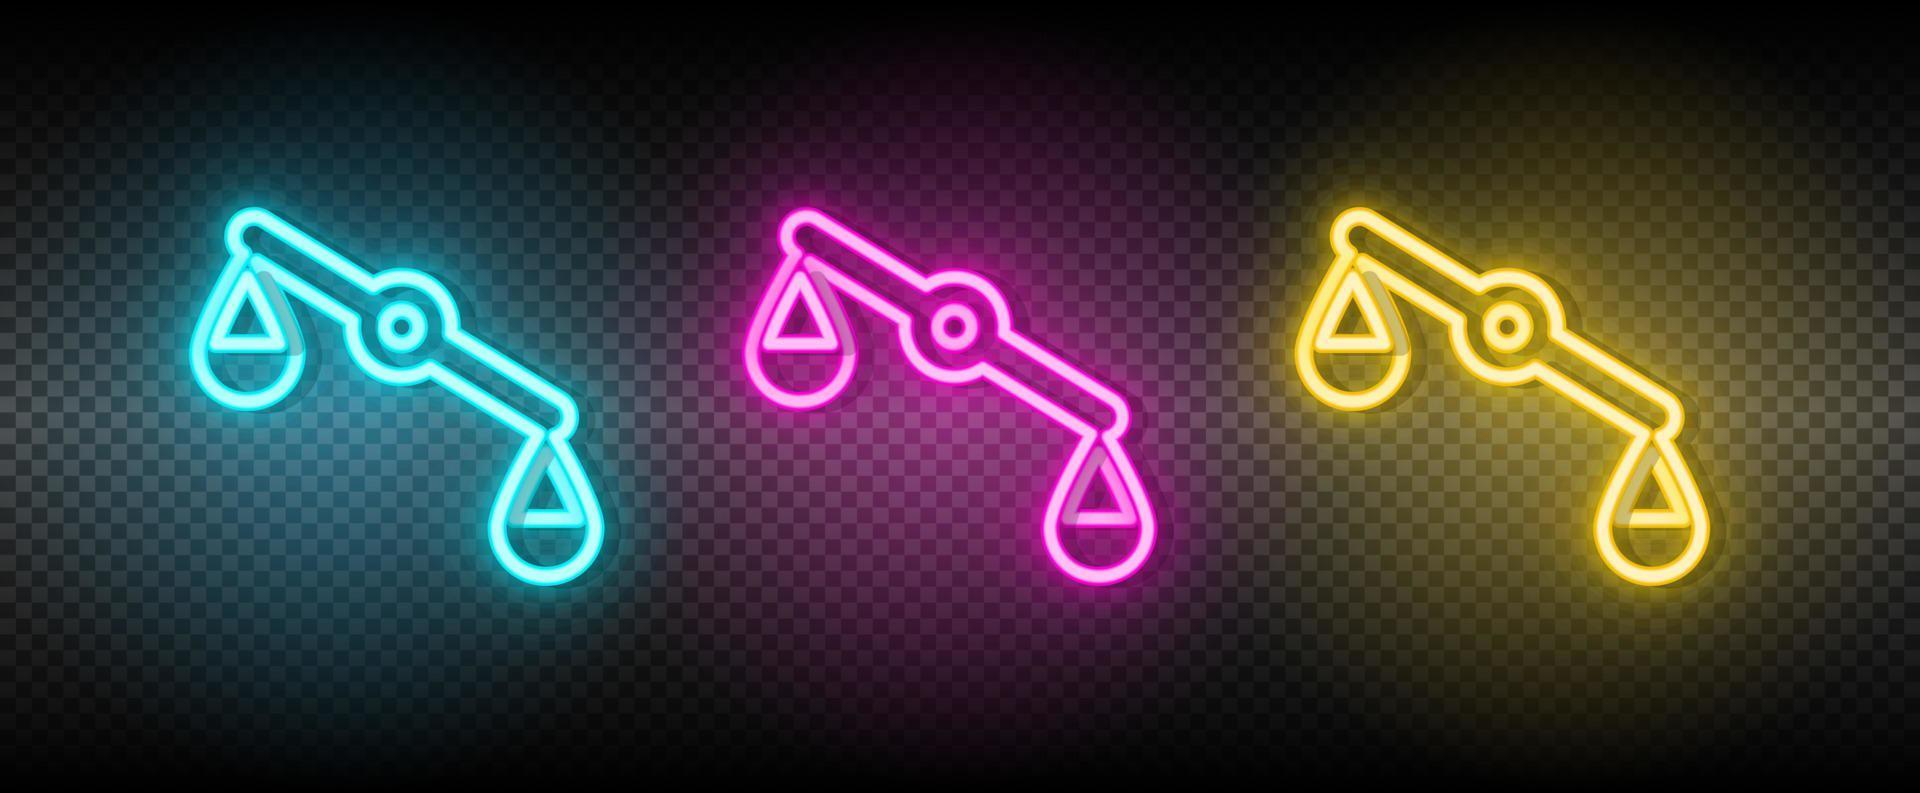 misbalance, justice, scale neon vector icon. Illustration neon blue, yellow, red icon set